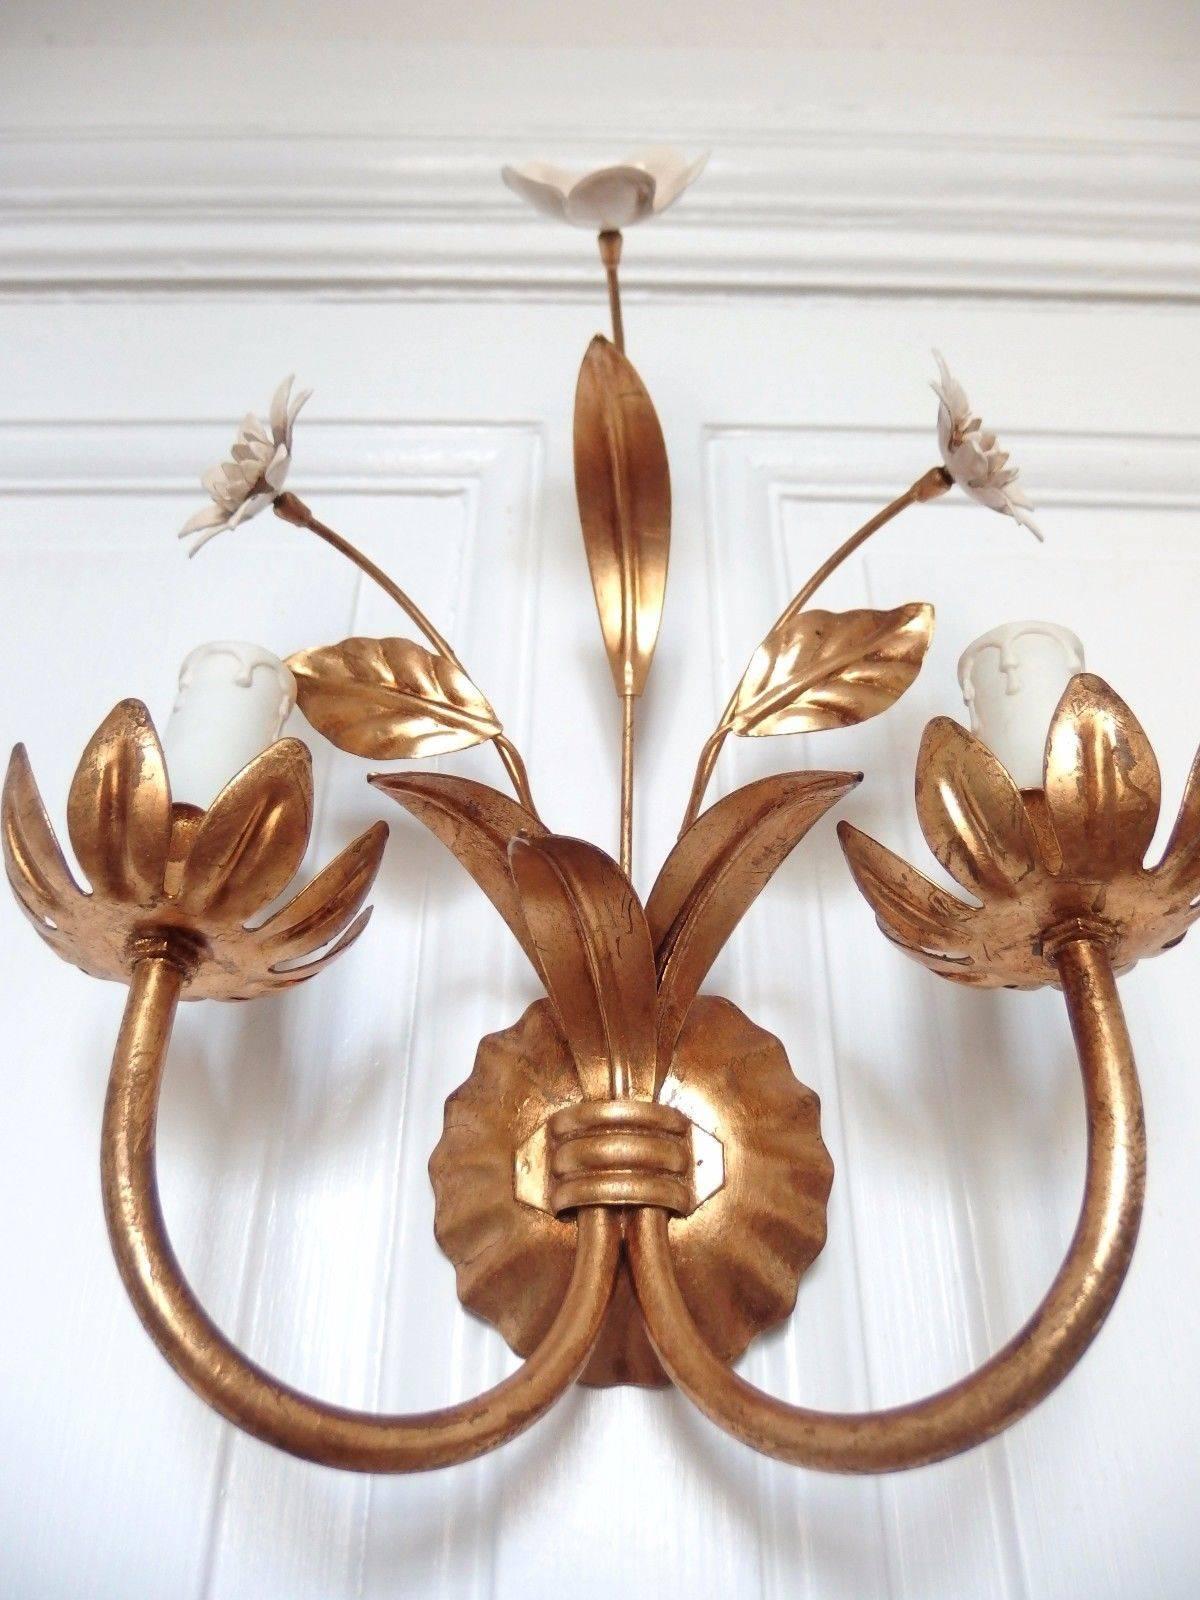 Mid-20th Century French Wall Light Sconce in the Style of Mainson Bagués  For Sale